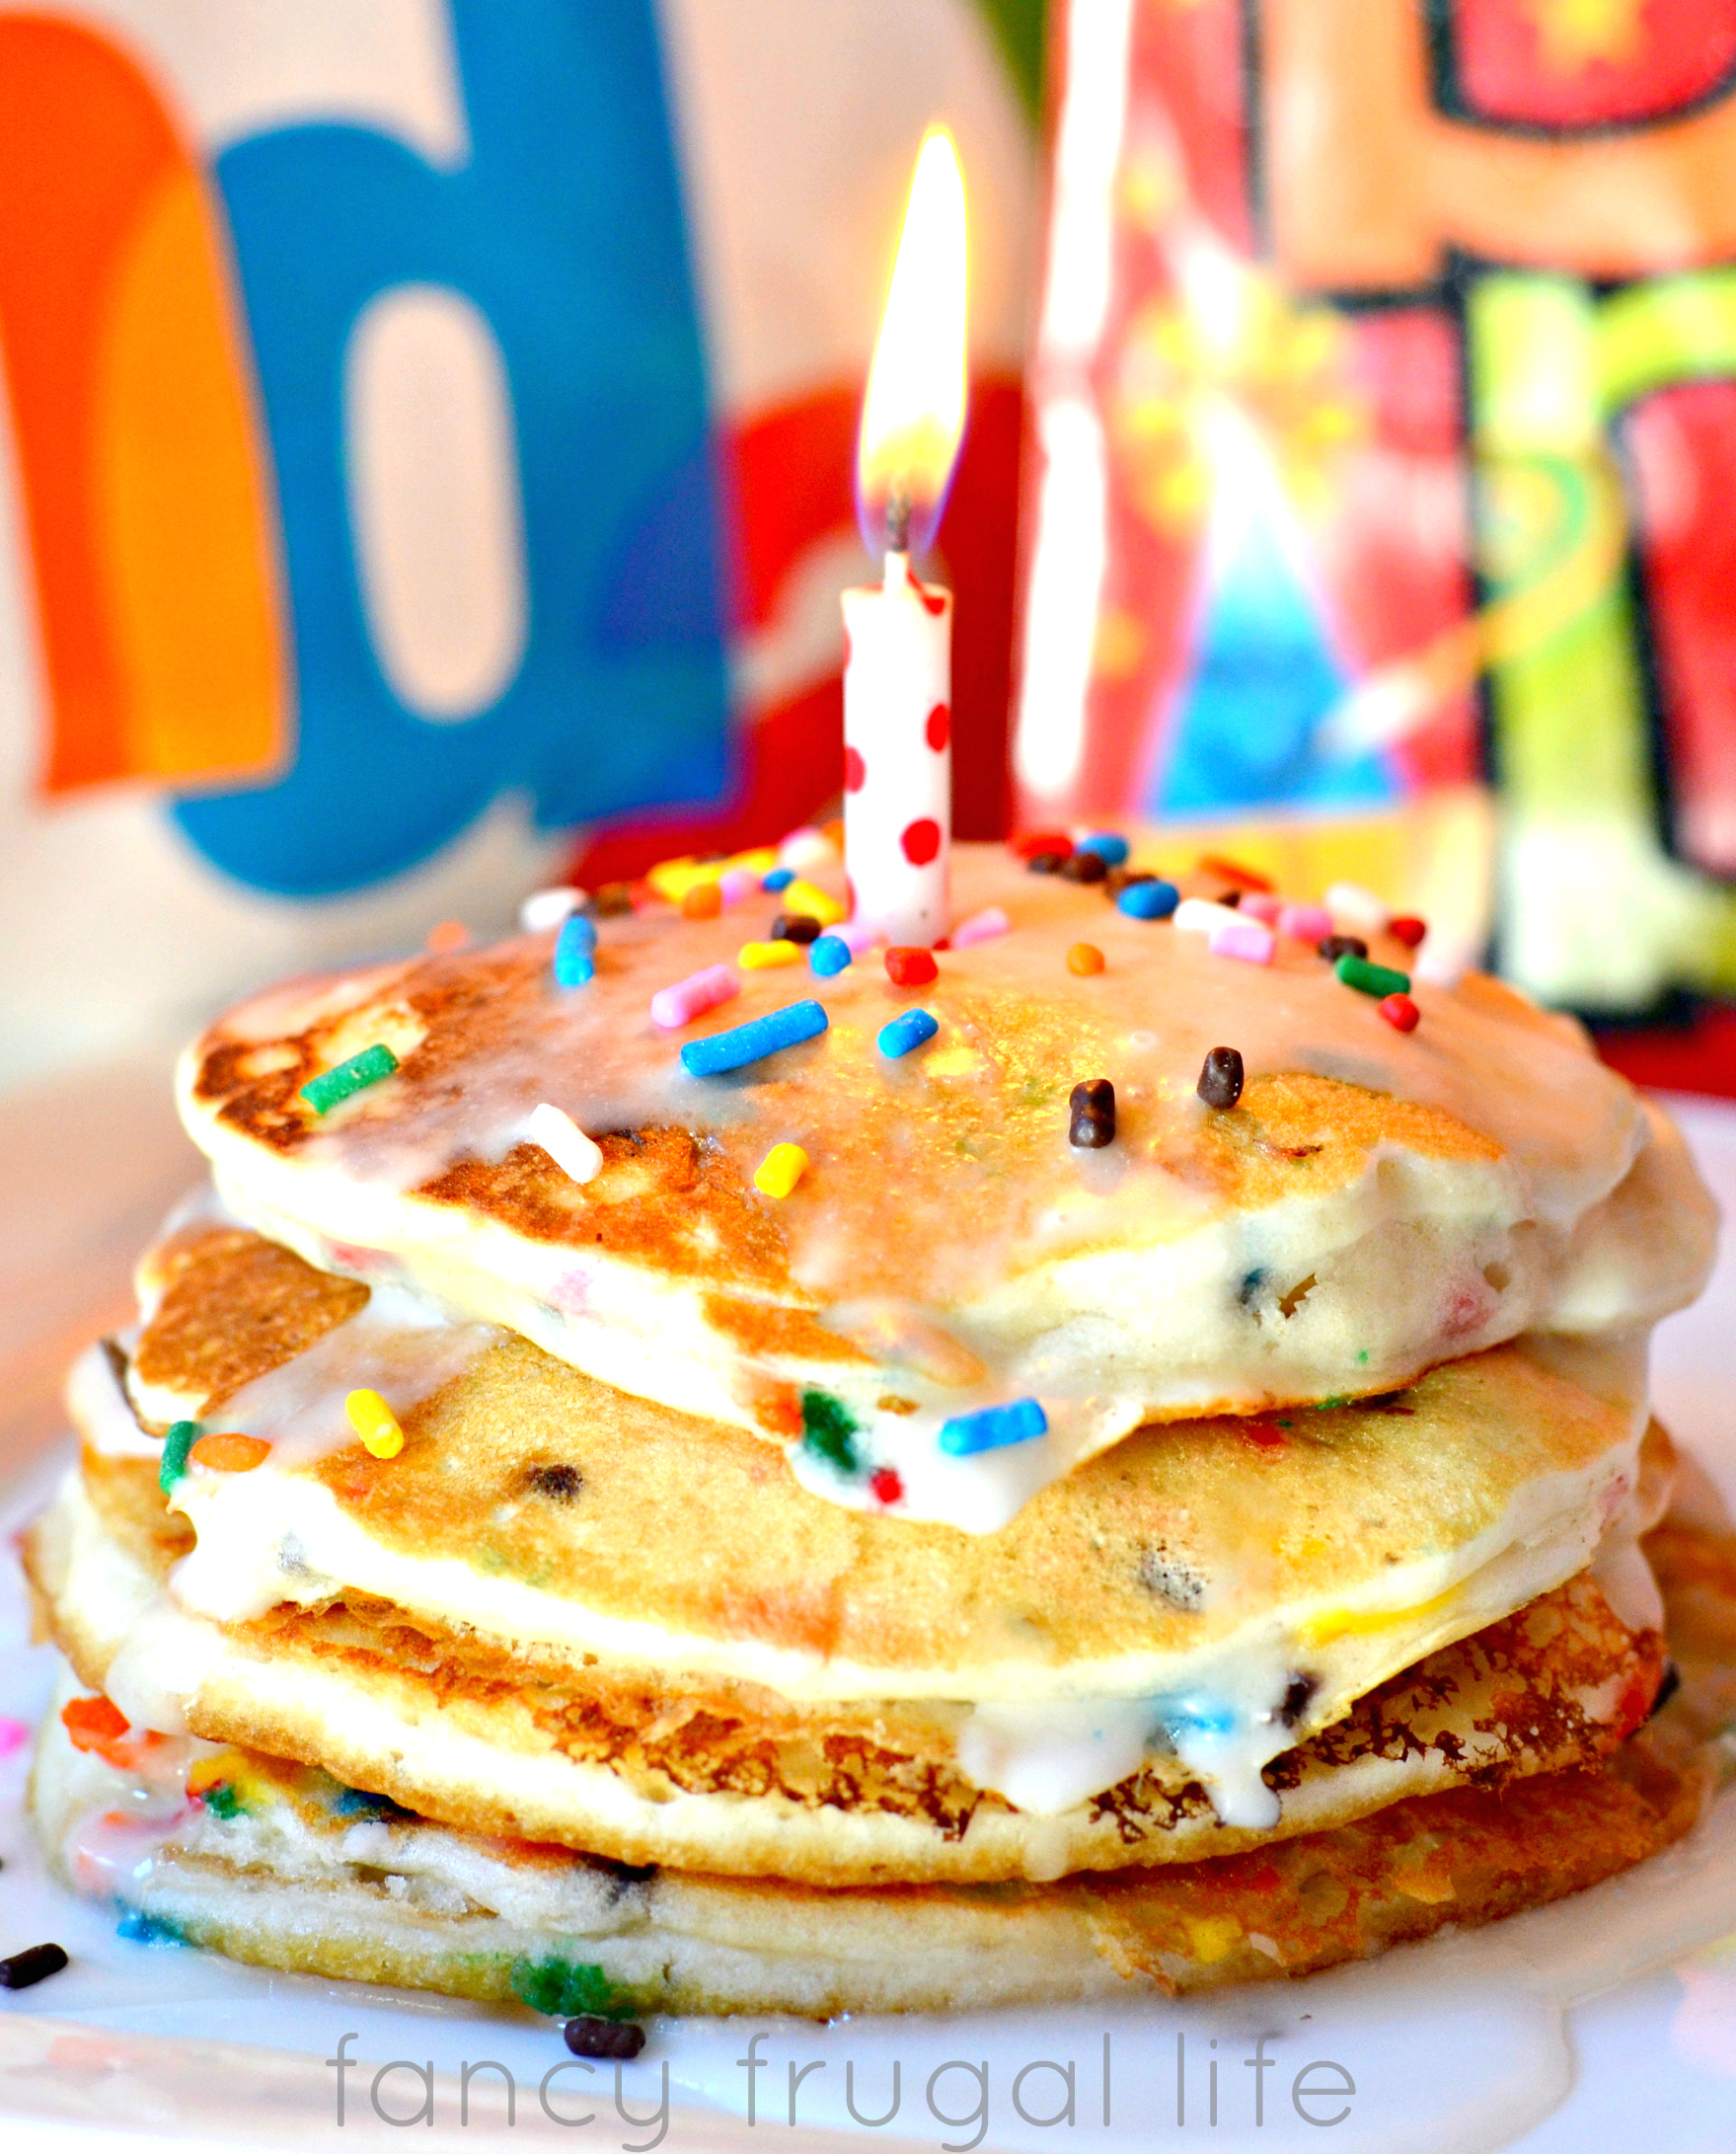 7 Photos of Pancakes With Sprinkles In Them